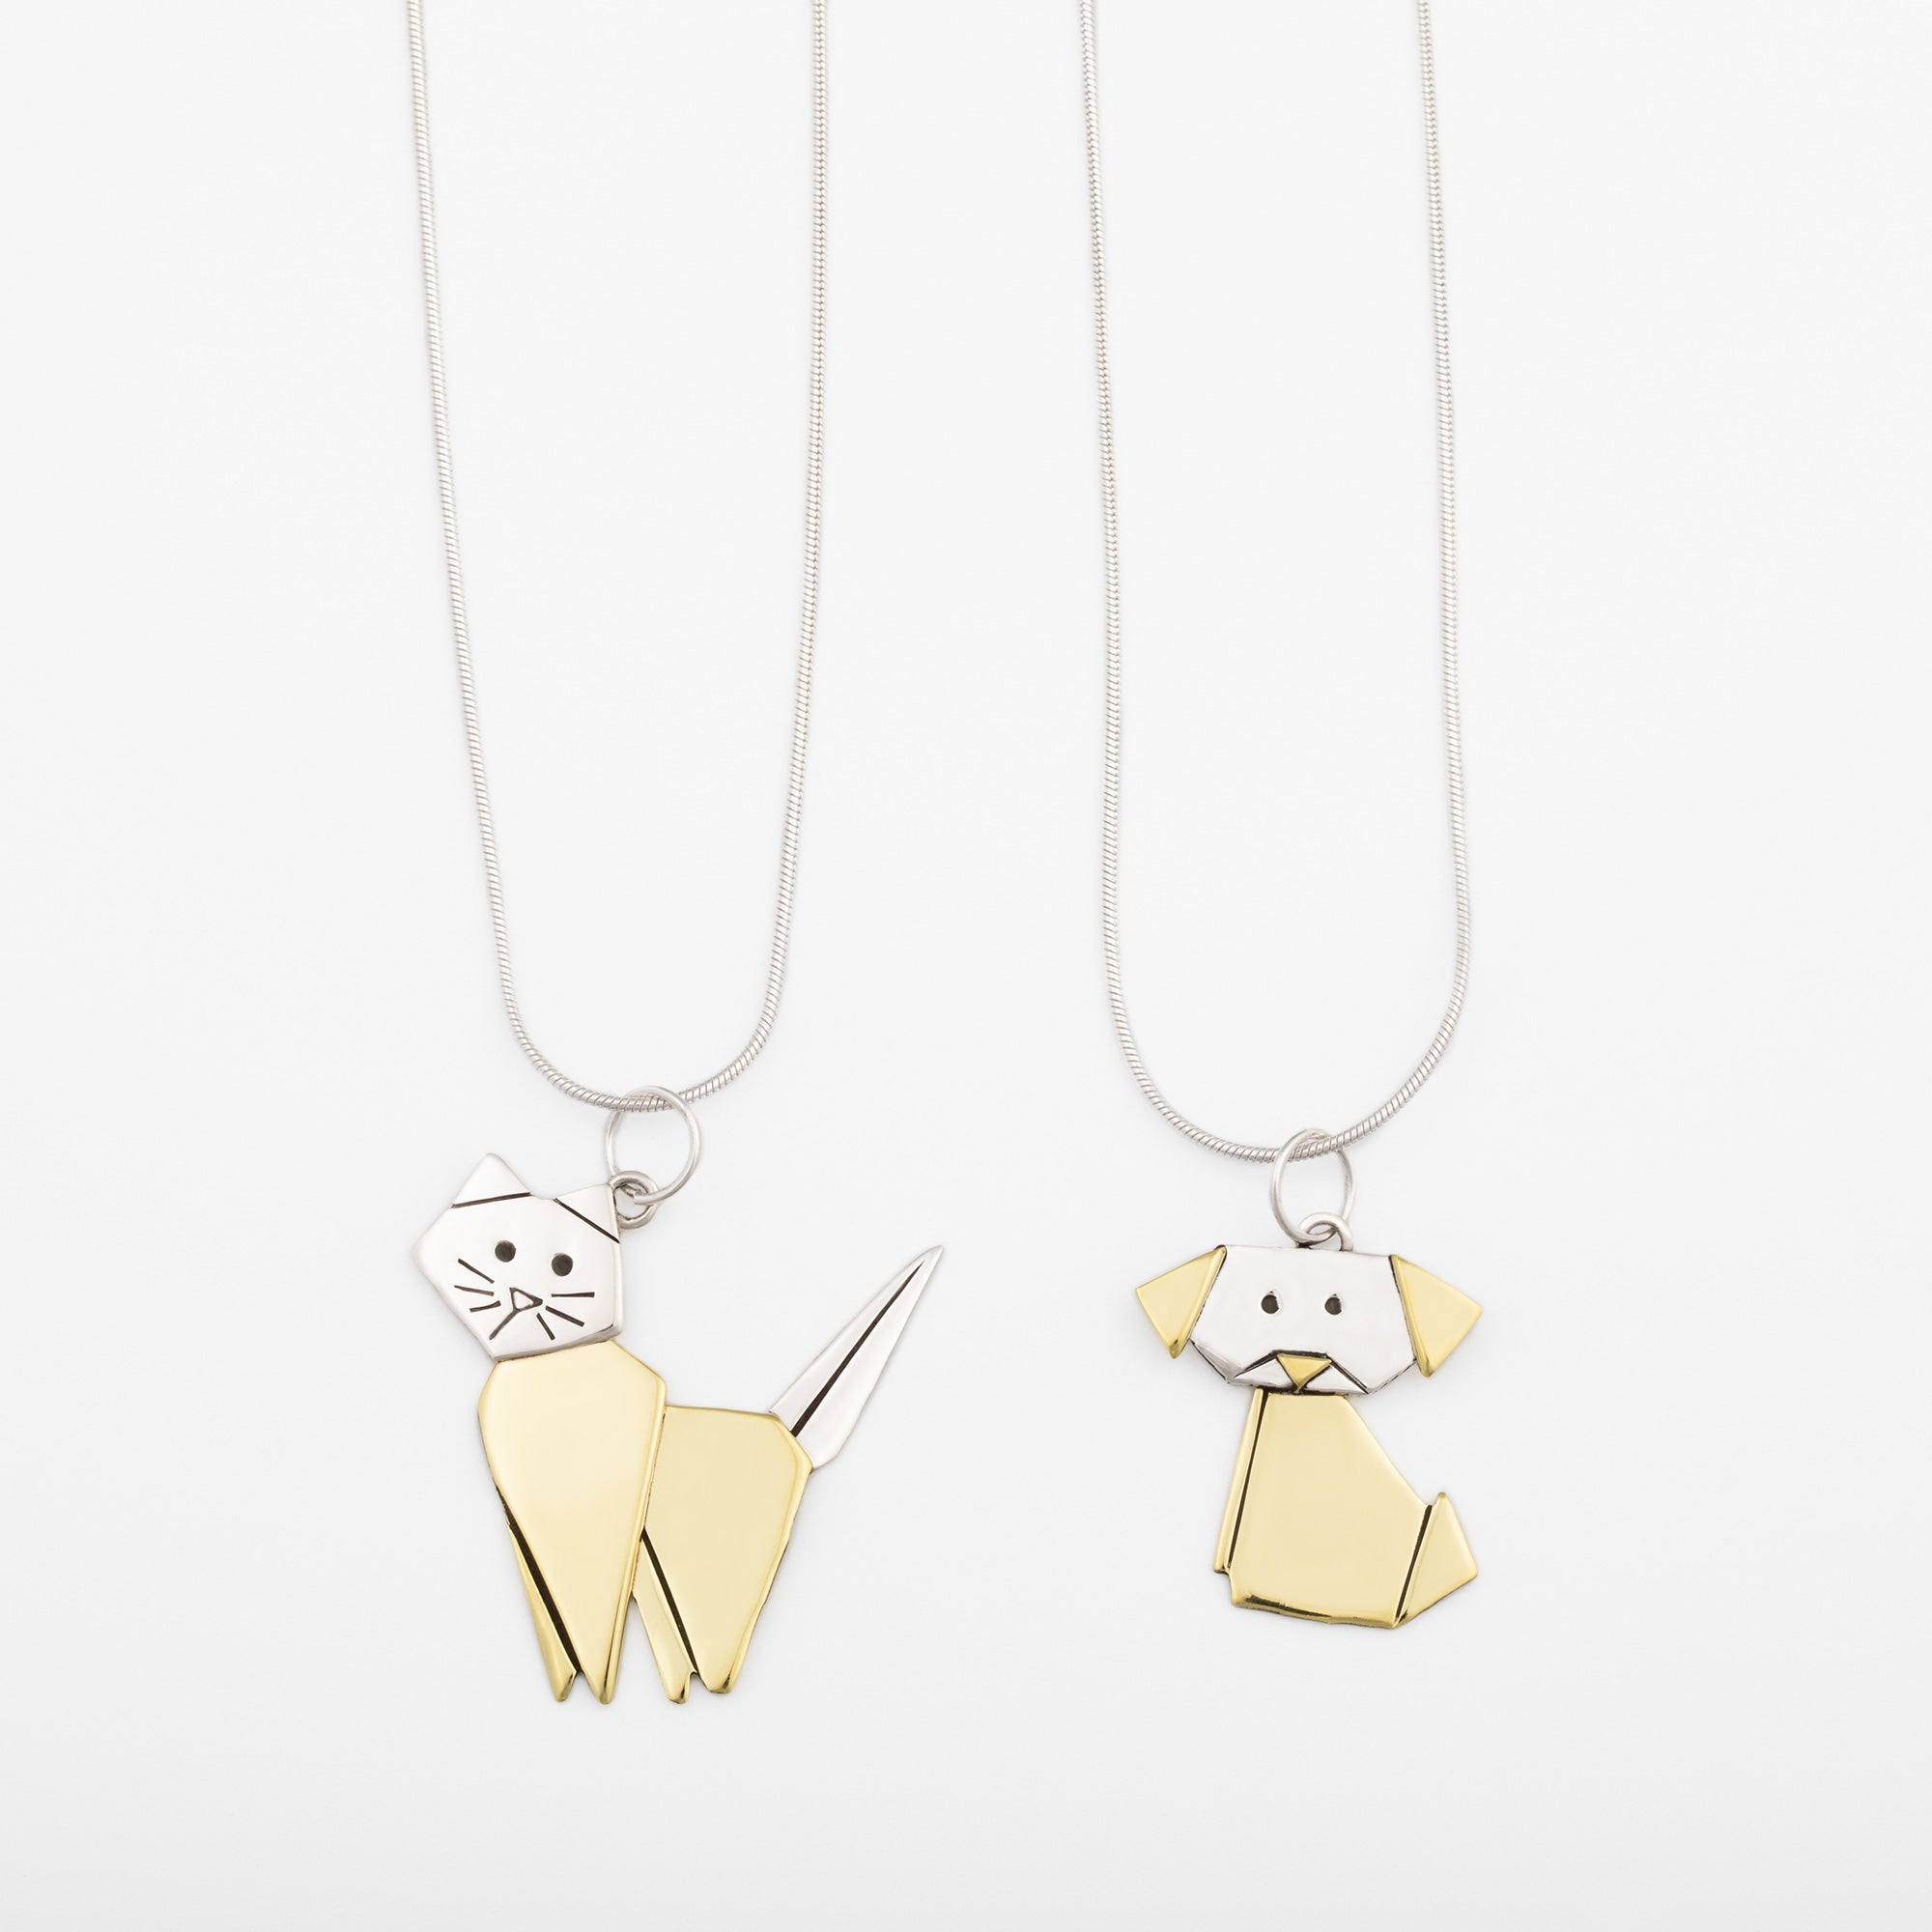 Origami Pet Necklace - Dog - With Diamond Cut Chain